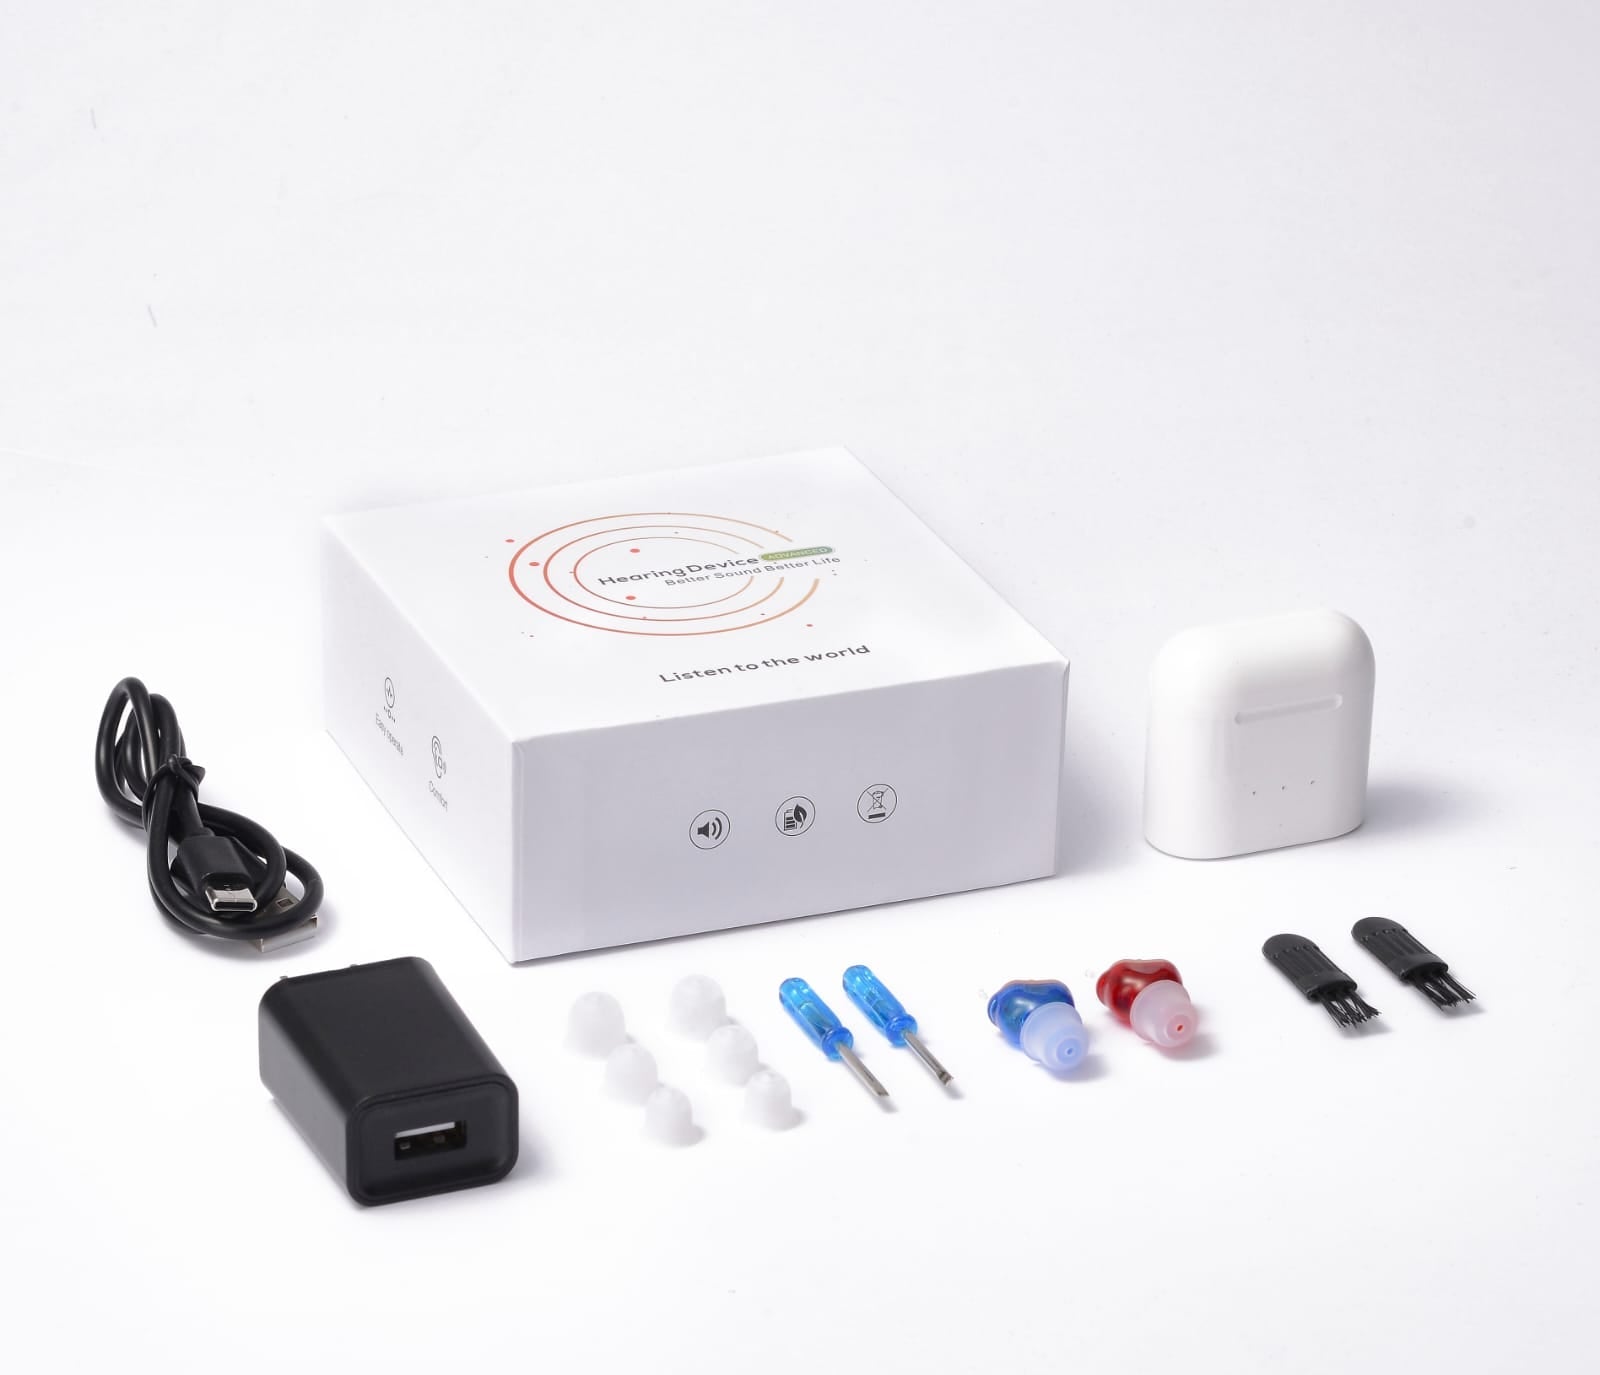 YES! IT'S HEARING AIDS SYSTEM, 2 functions in One system, eEAR® eEAR-BC-CIC-010 Bluetooth BONE CONDUCTION HEARING AID 2 in One SYSTEM Rechargeable CIC Hearing Aids & Bone Conduction BT Sold 10,000+ worldwide